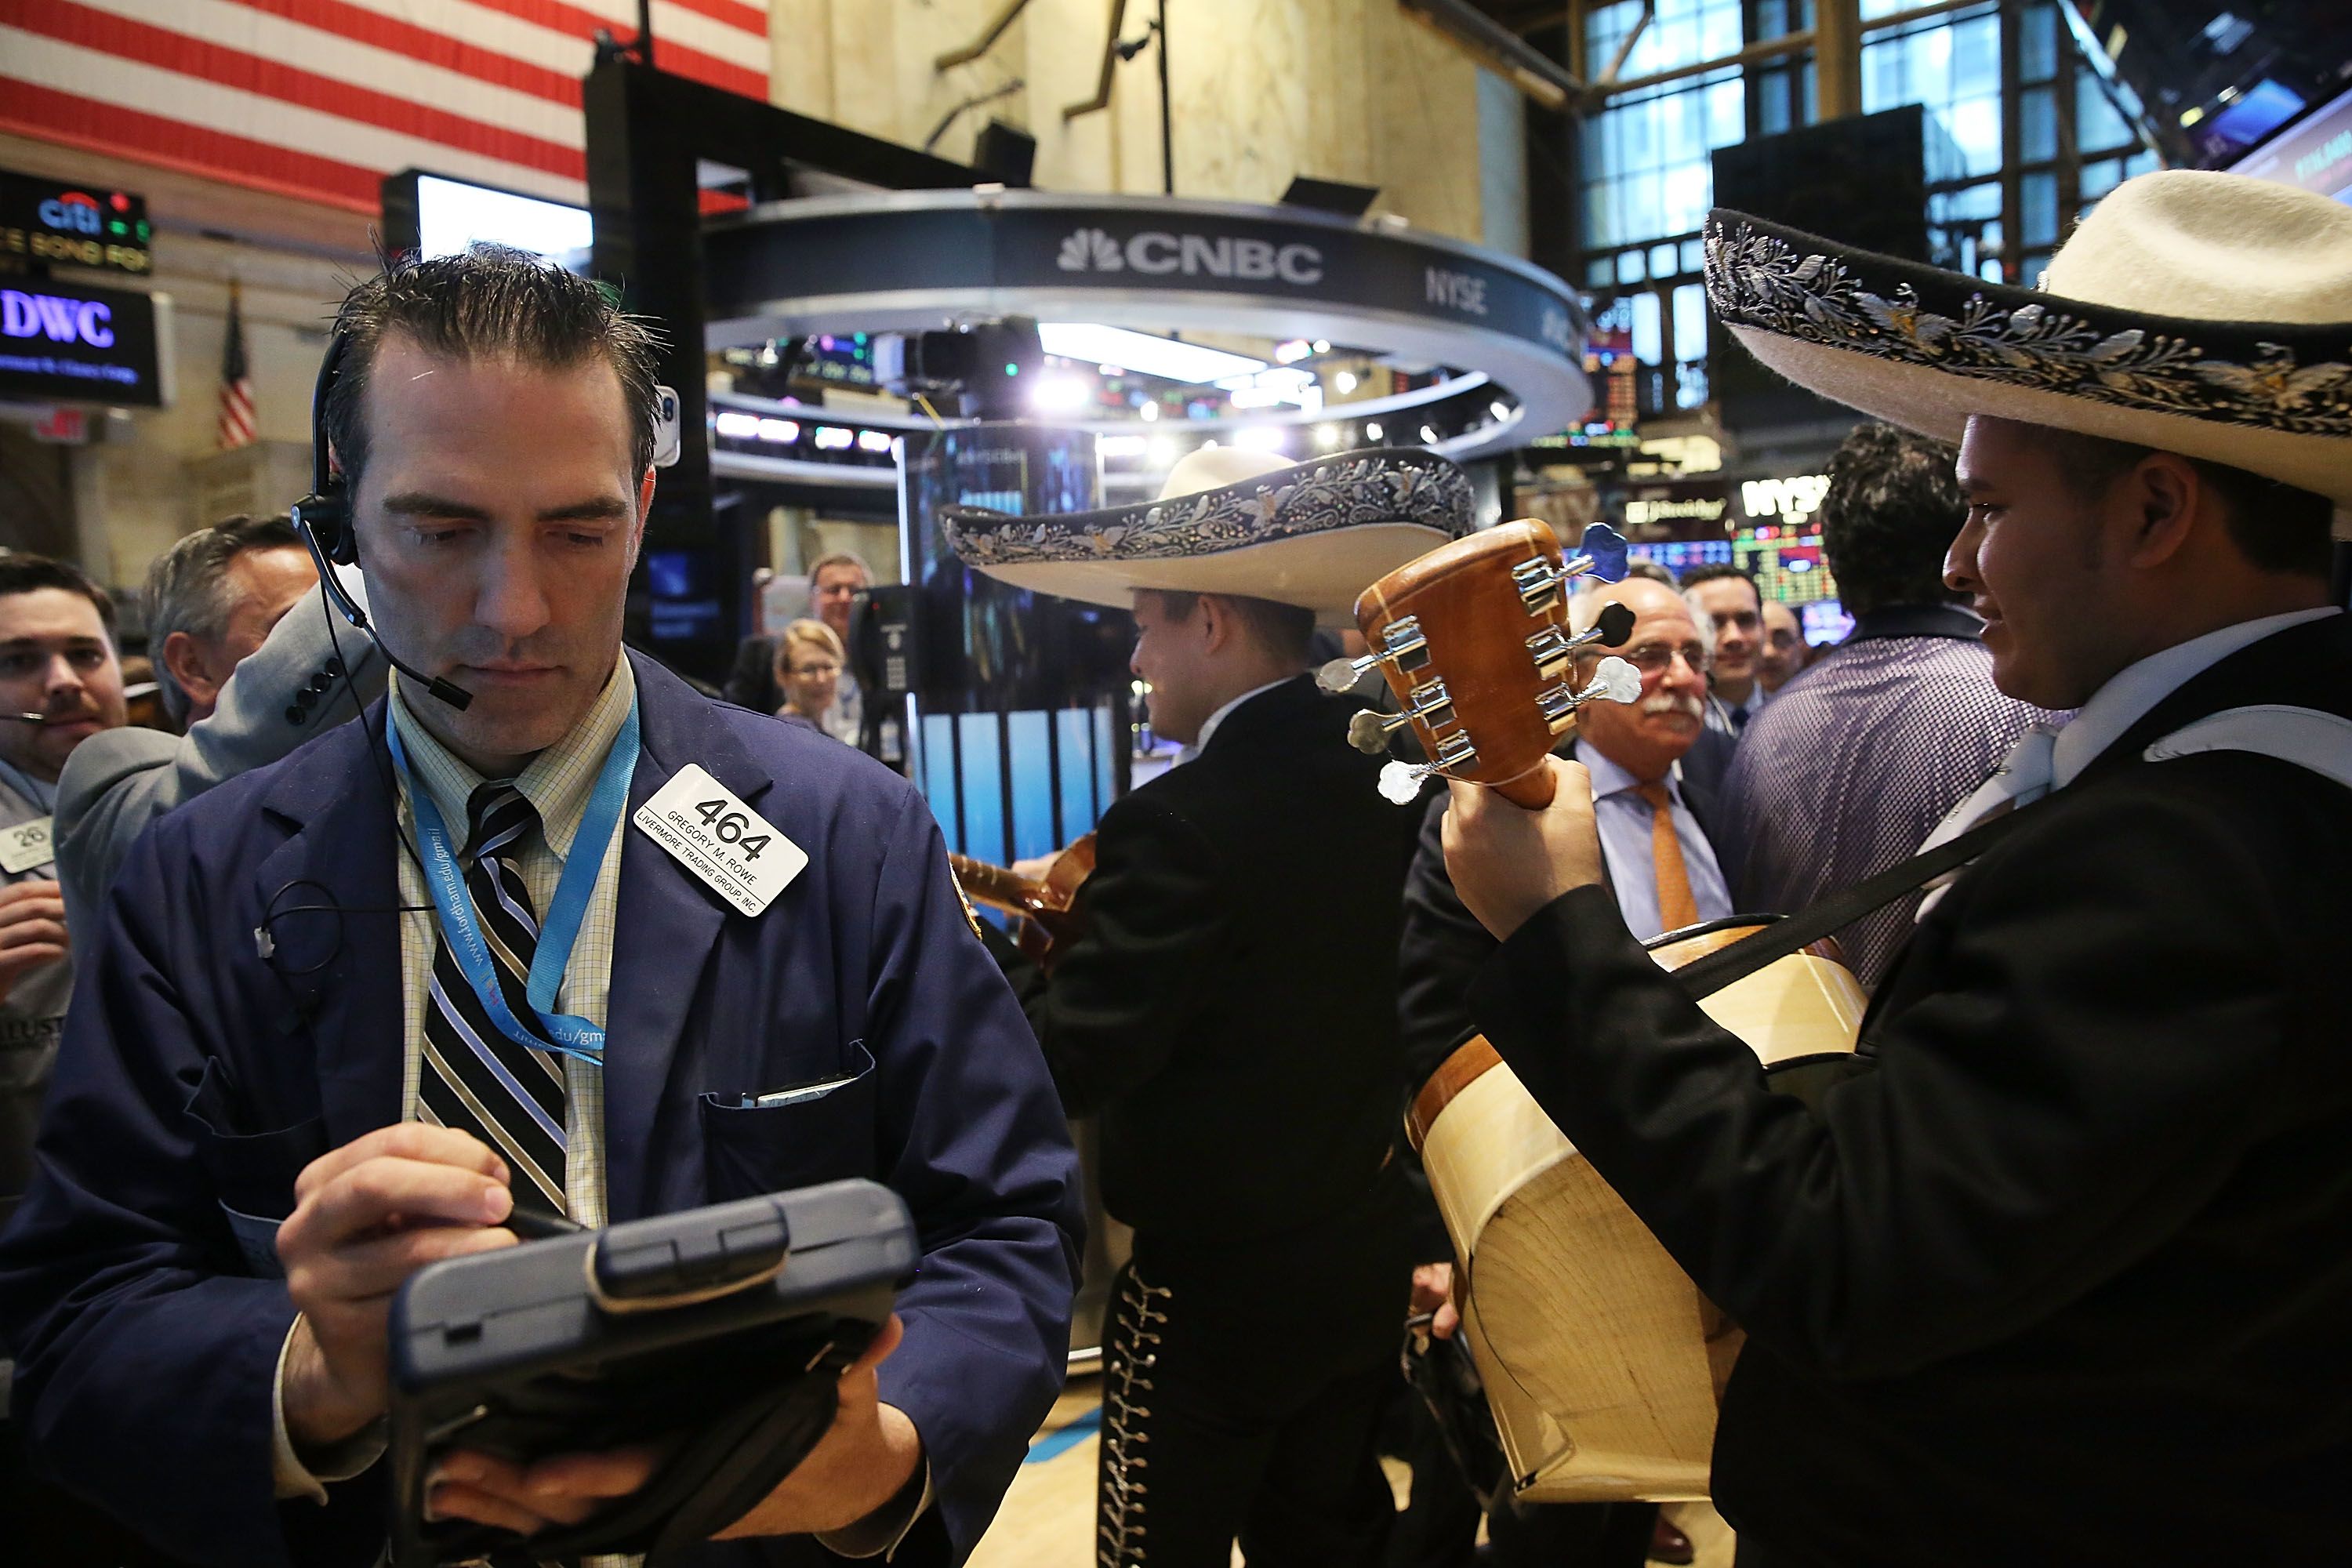 Stocks making biggest moves midday: Micron Technology, Wynn Resorts